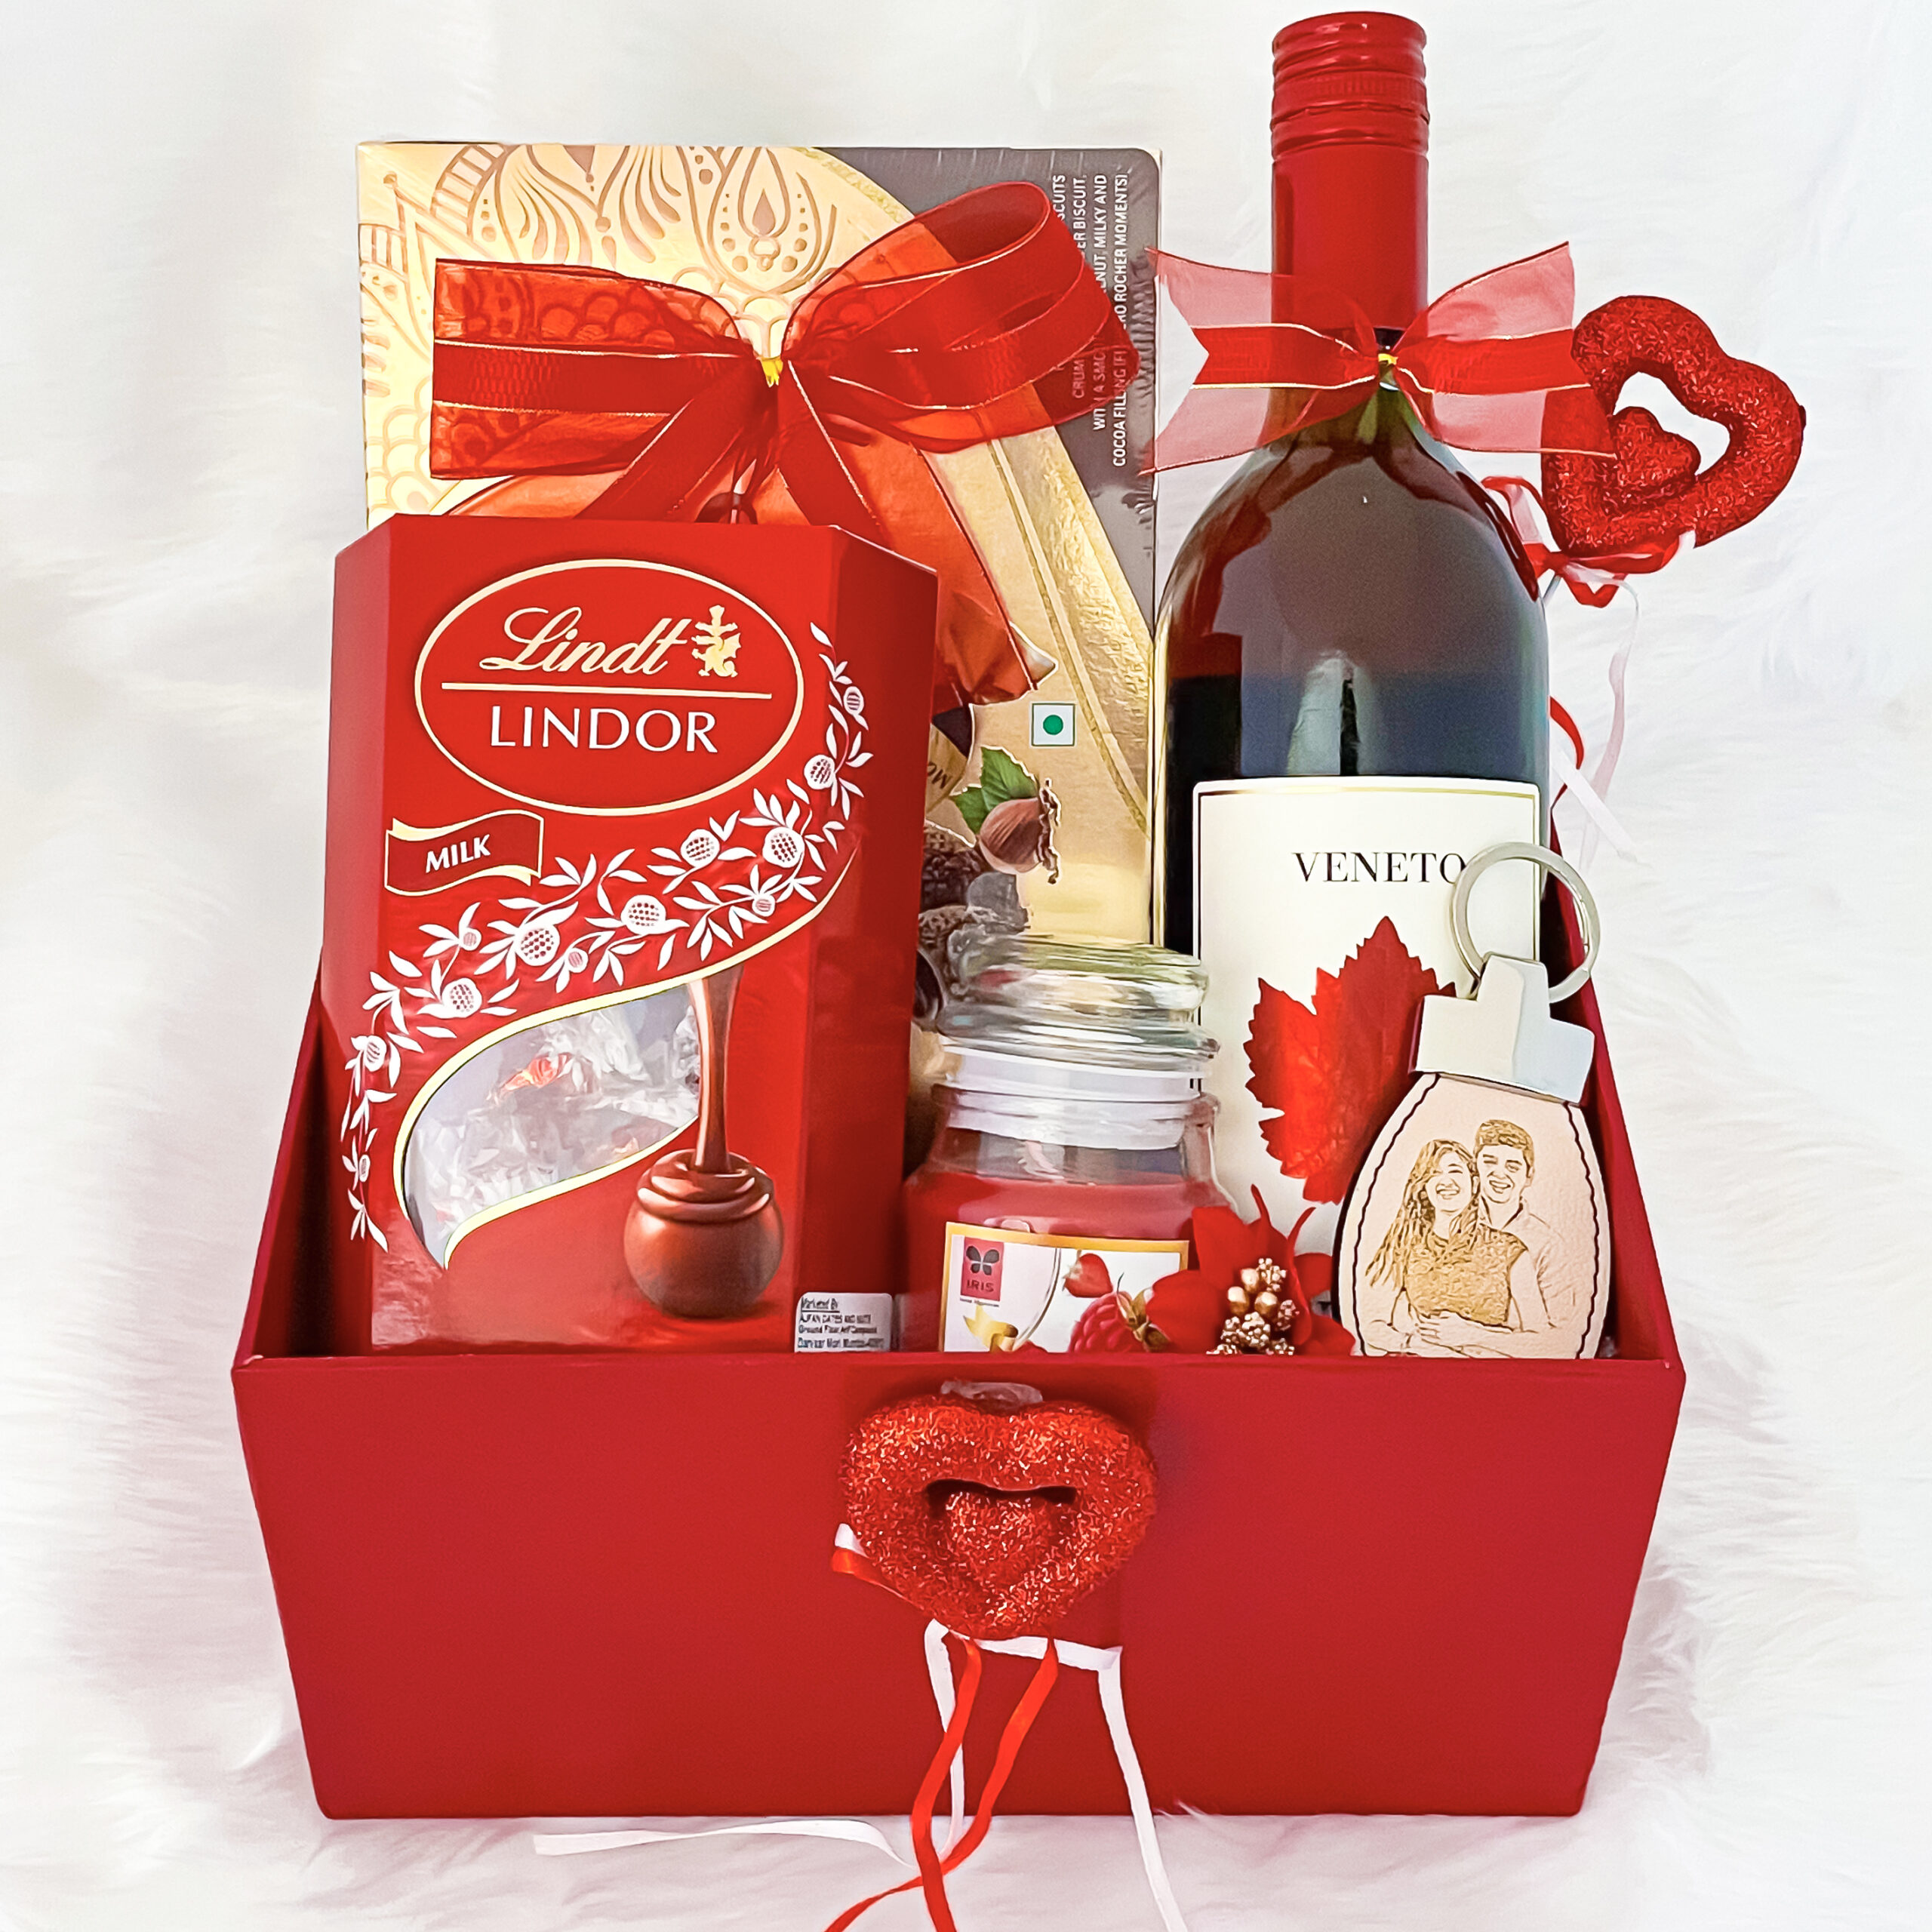 Cute valentines day hampers for with elegant chocolates, keychain, wine, candle, and cards